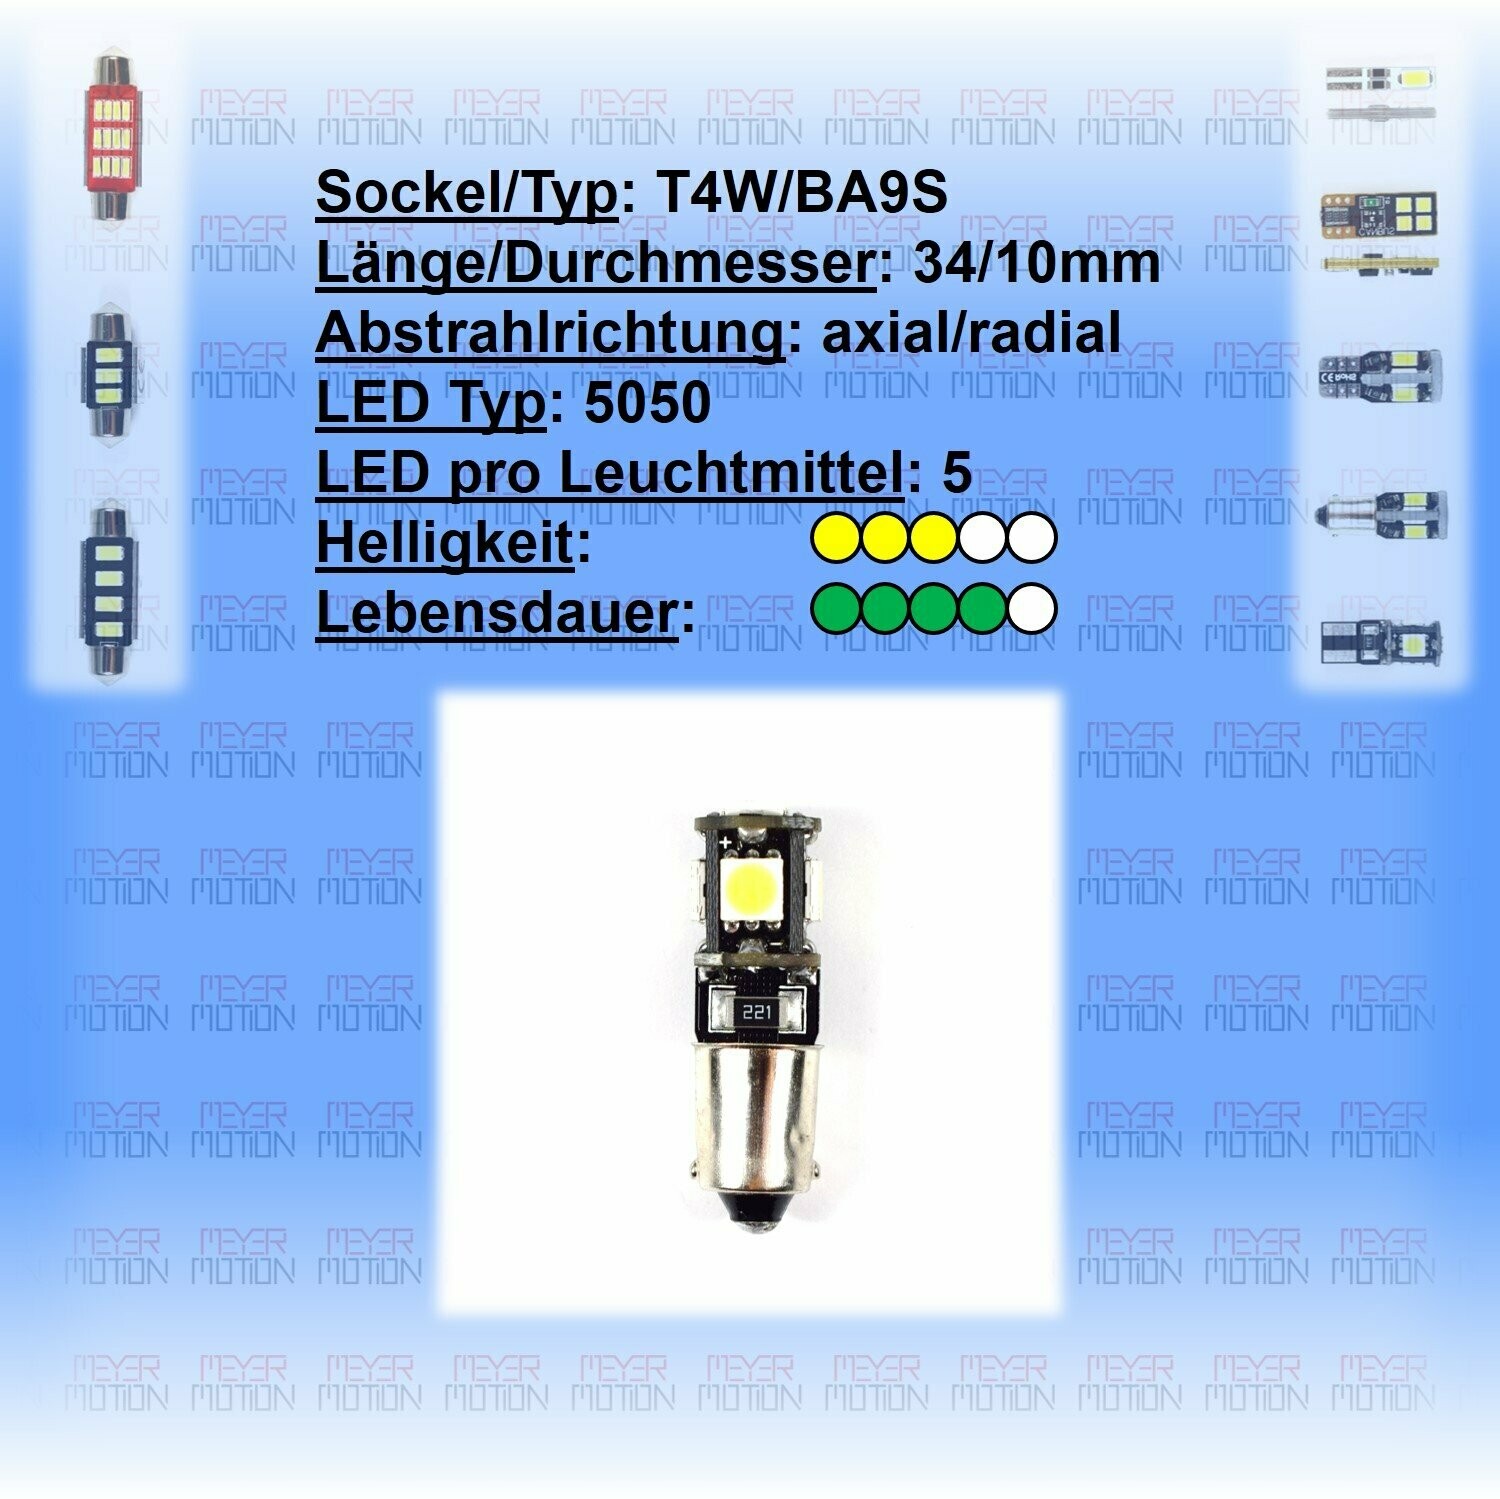 BAX9S (H6W) - SMD-LED-Lampen - Weiß